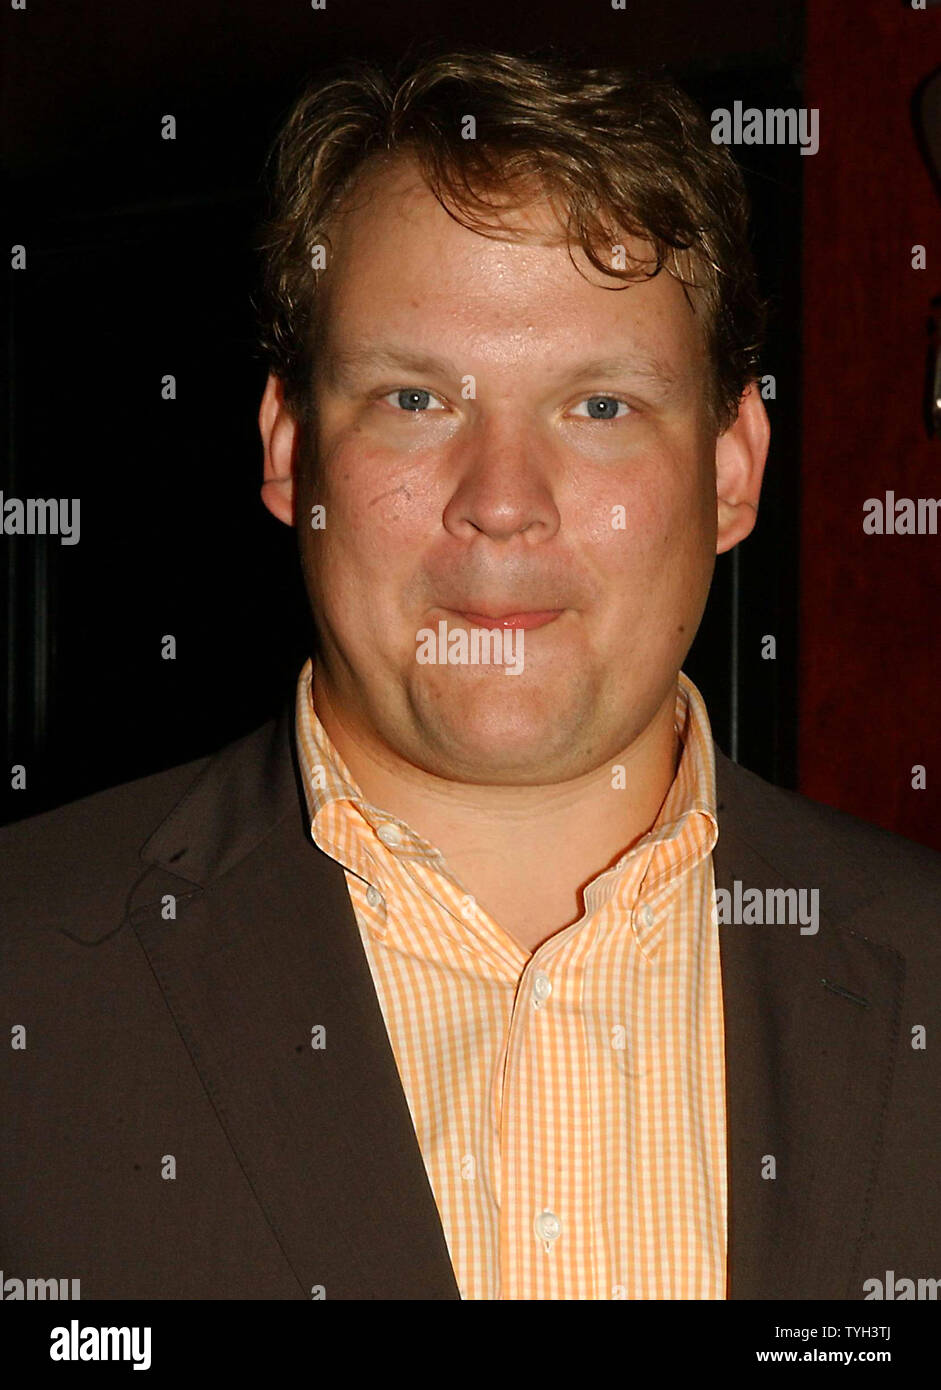 Actor Andy Richter voice talent of the Dreamworks animated film 'Madagascar' arrive for the May 15, 2005 New York premiere of his film.  (UPI Photo/Ezio Petersen) Stock Photo